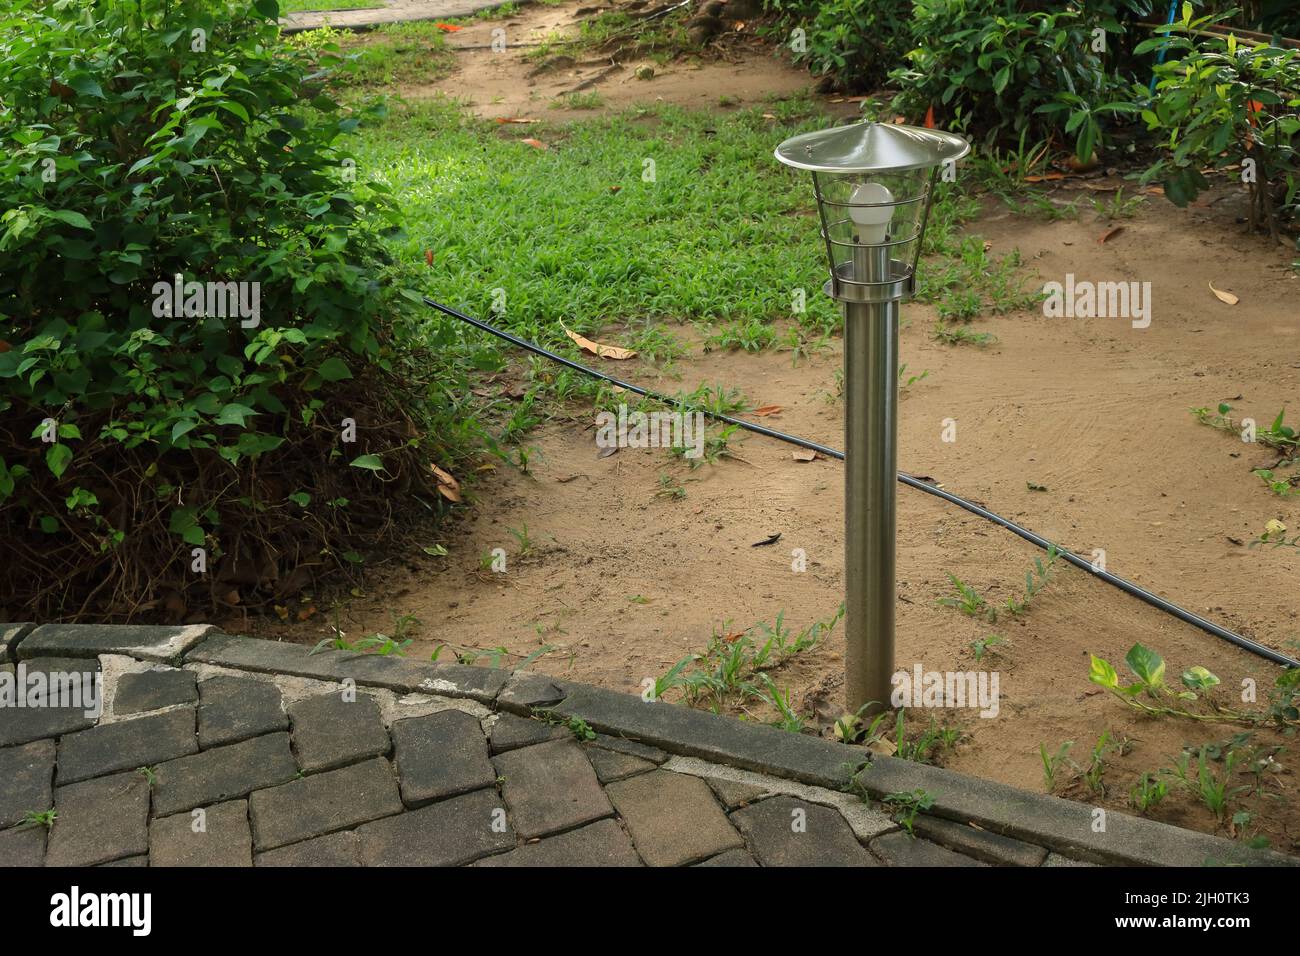 Modern style silver colored lamp post with LED energy saving bulb installed in garden next to walkway Stock Photo